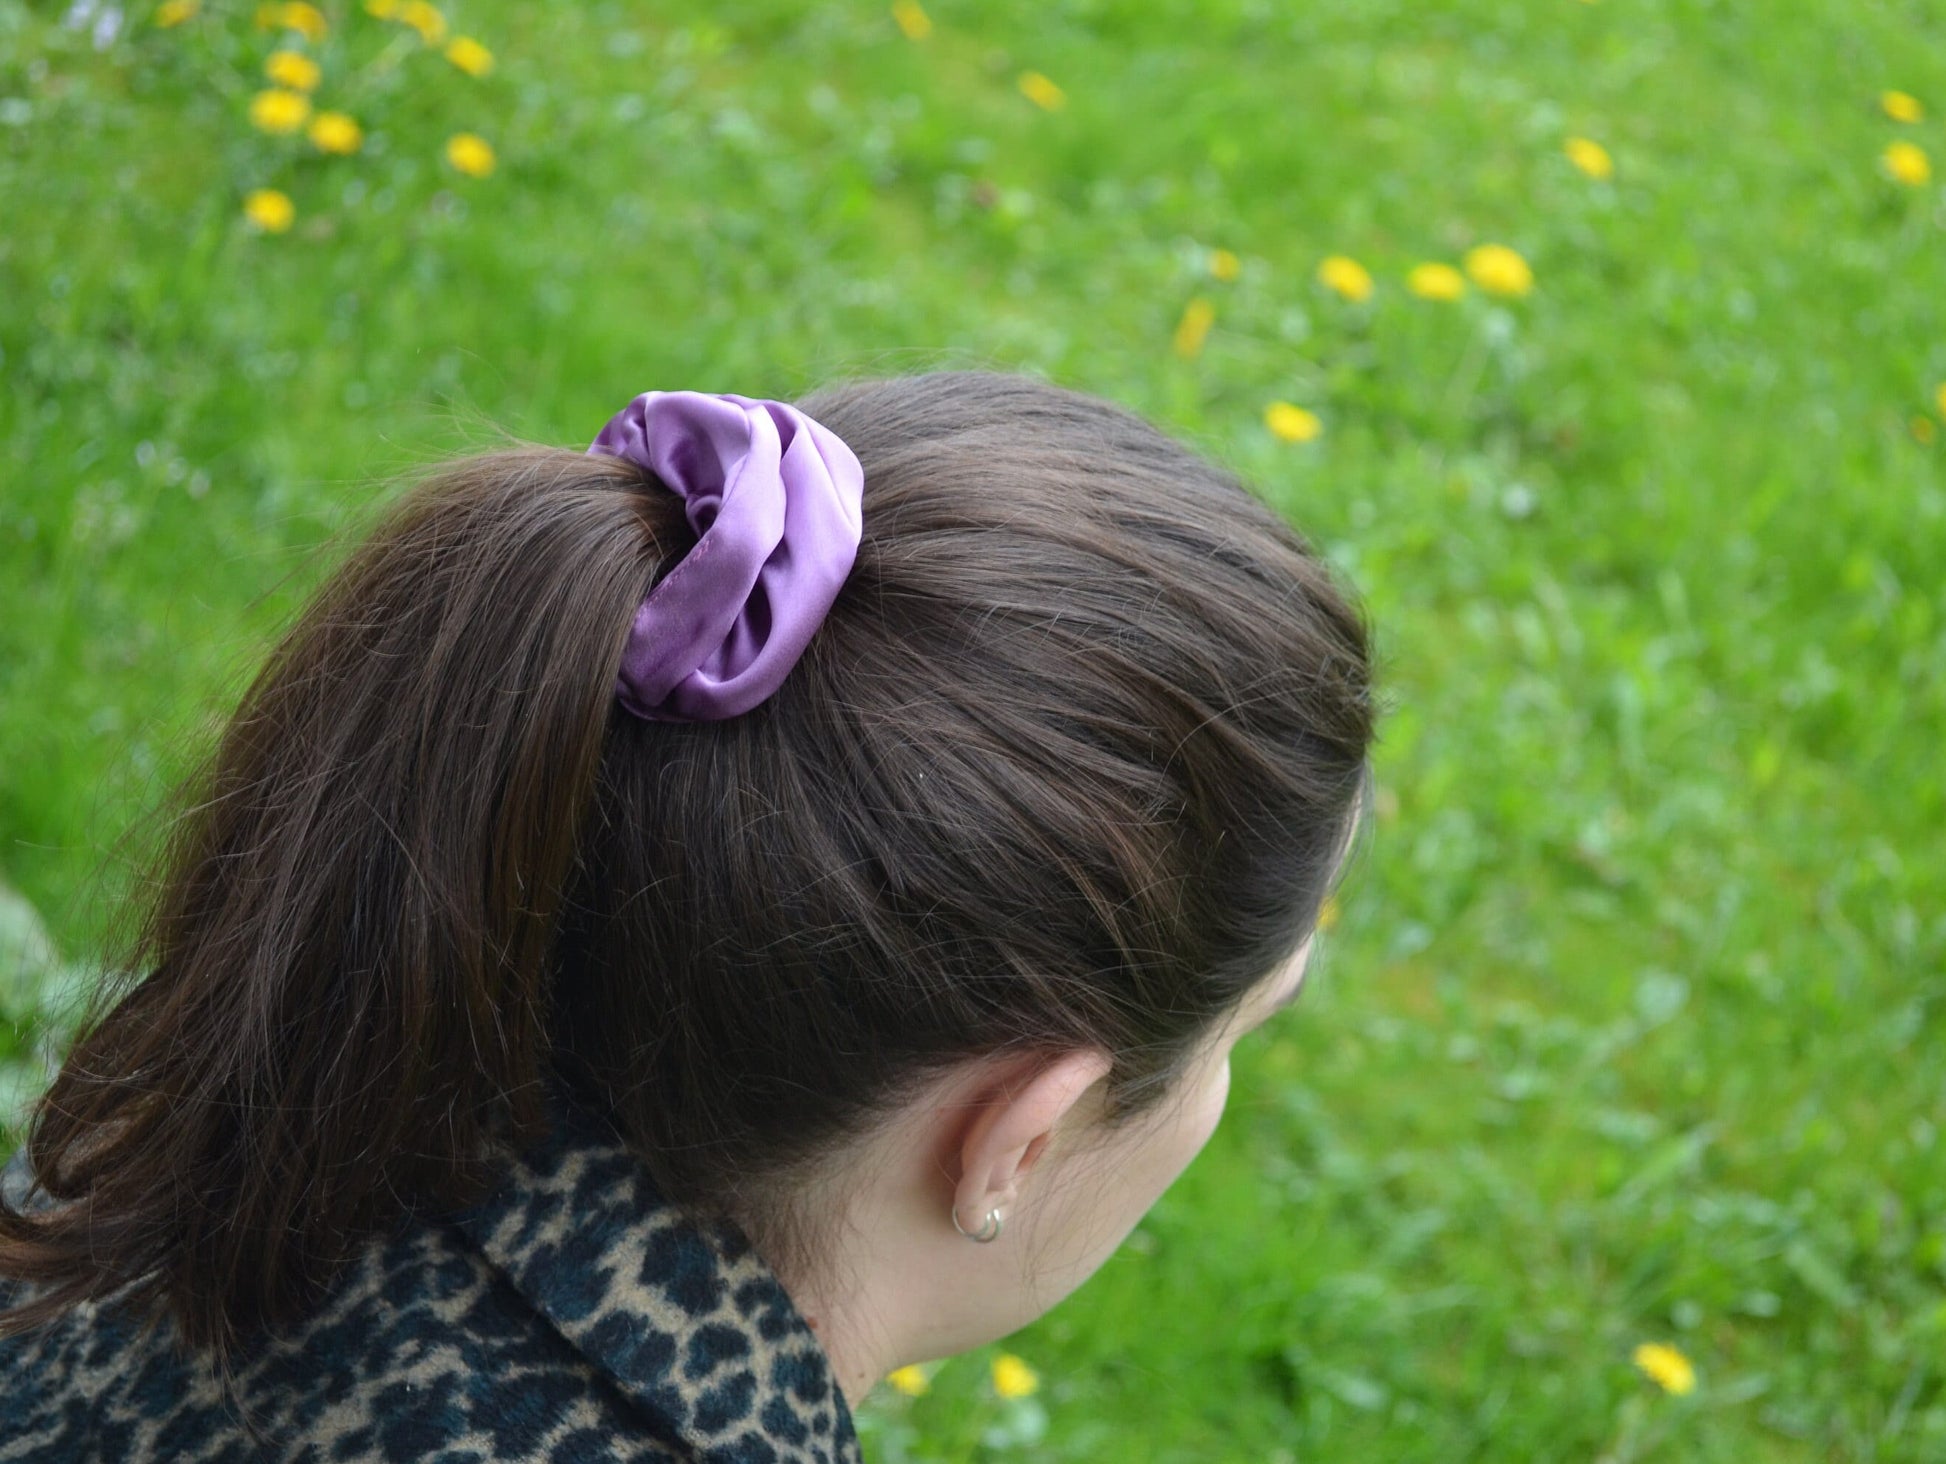 Scrunchie Eating Disorder and Mental Health Awareness, part of profit donated to ED charity, handmade gift for her, Silk hair accessory